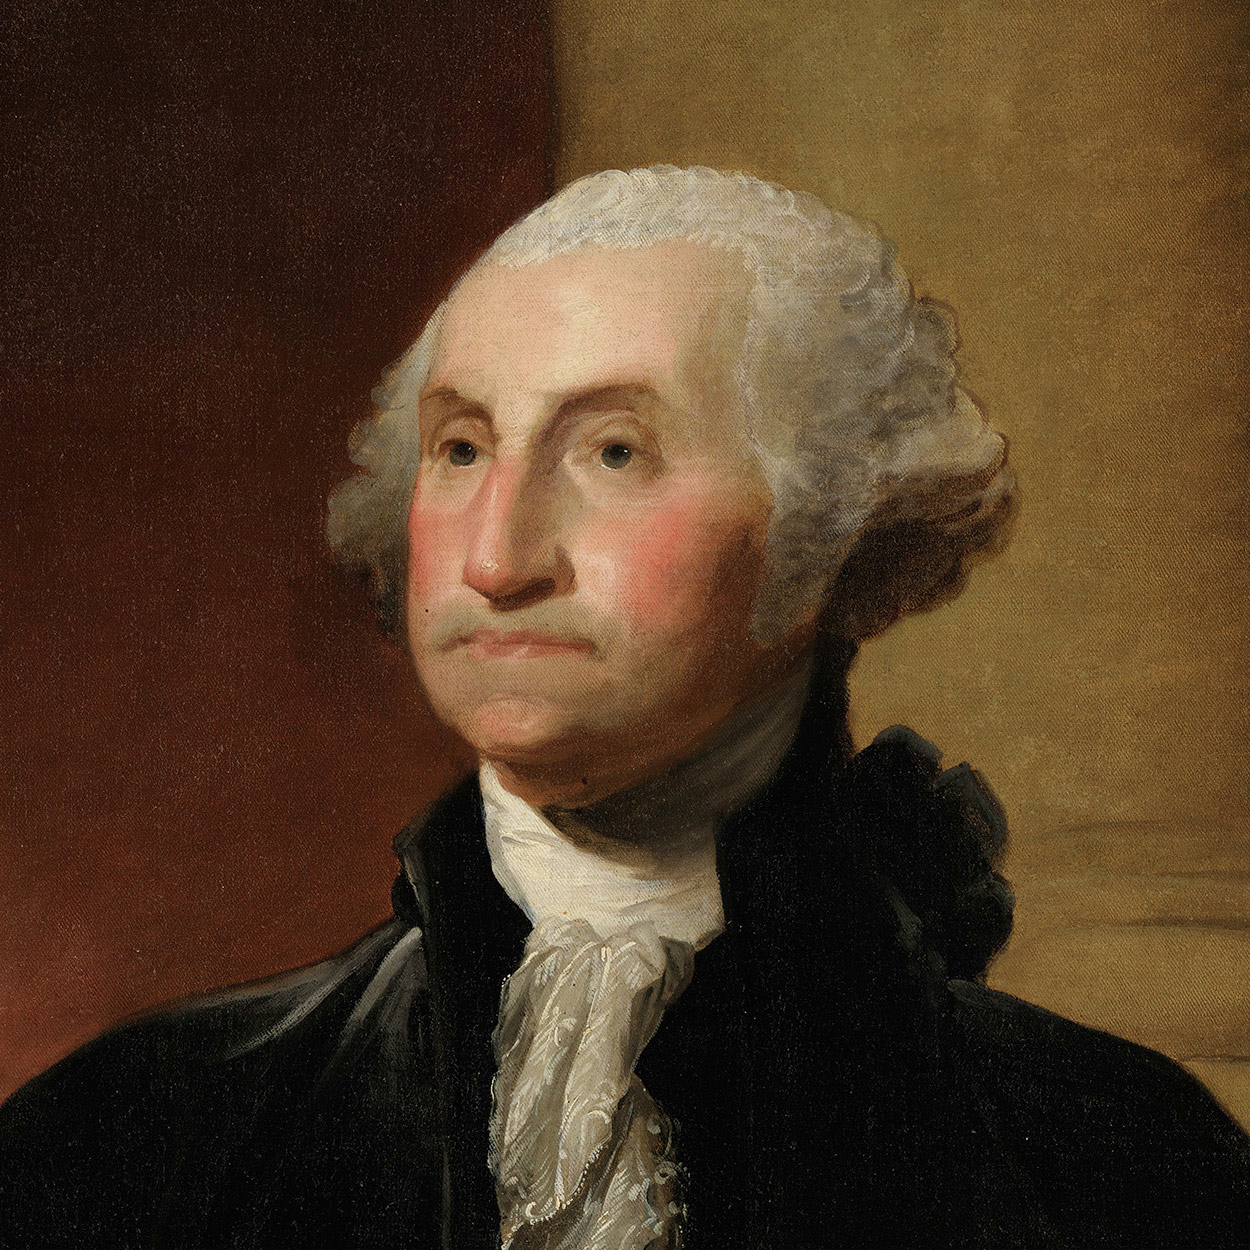 Portrait of George Washington, the 1st President of the United States